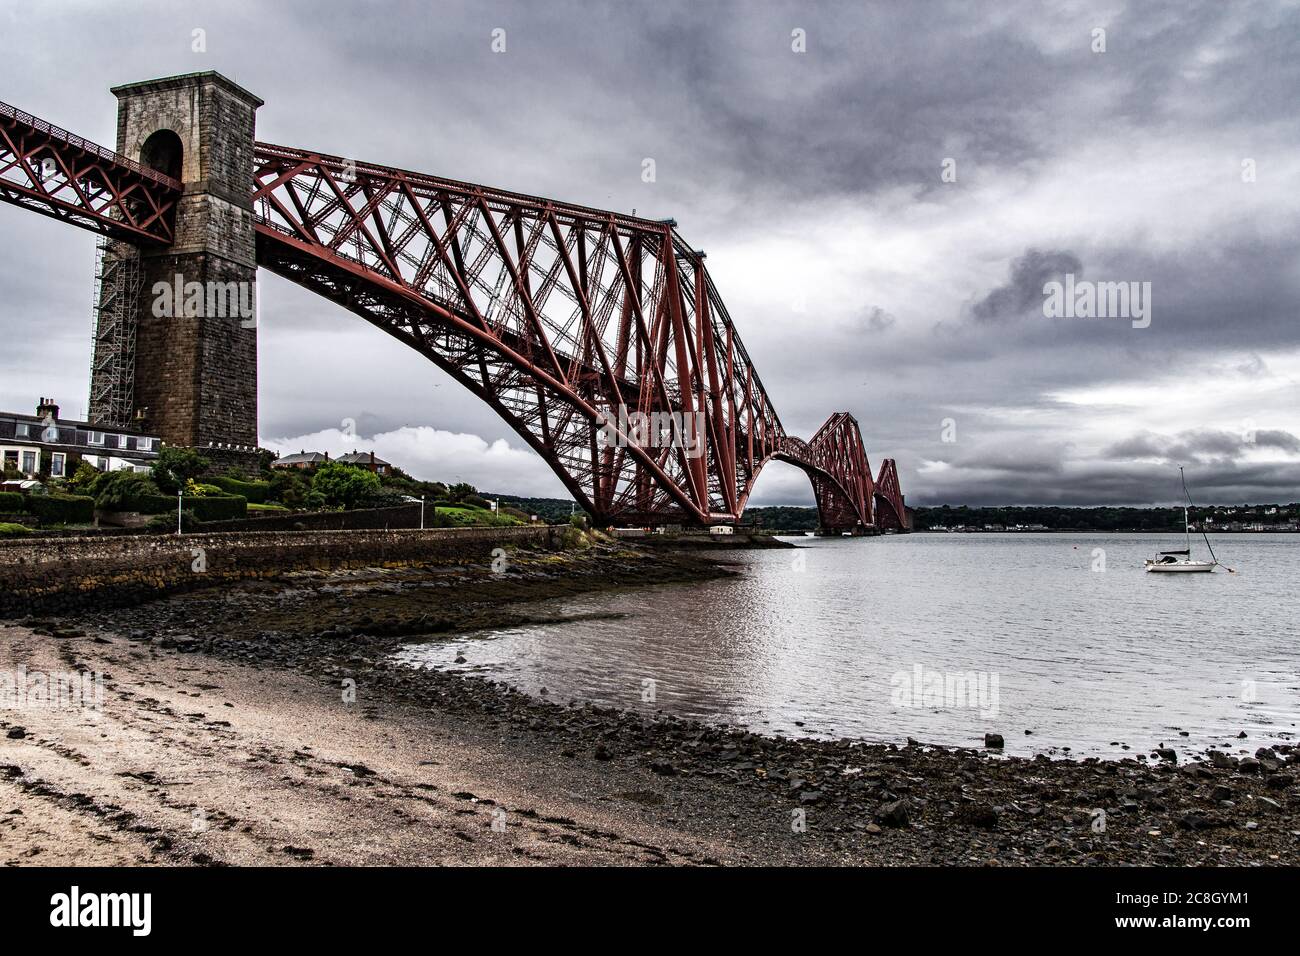 Edinburgh, SCOTLAND: Beautiful view of the railway bridge 'Firth of Forth'. The red bridge seen from the abandoned Albert Hotel Building. Stock Photo